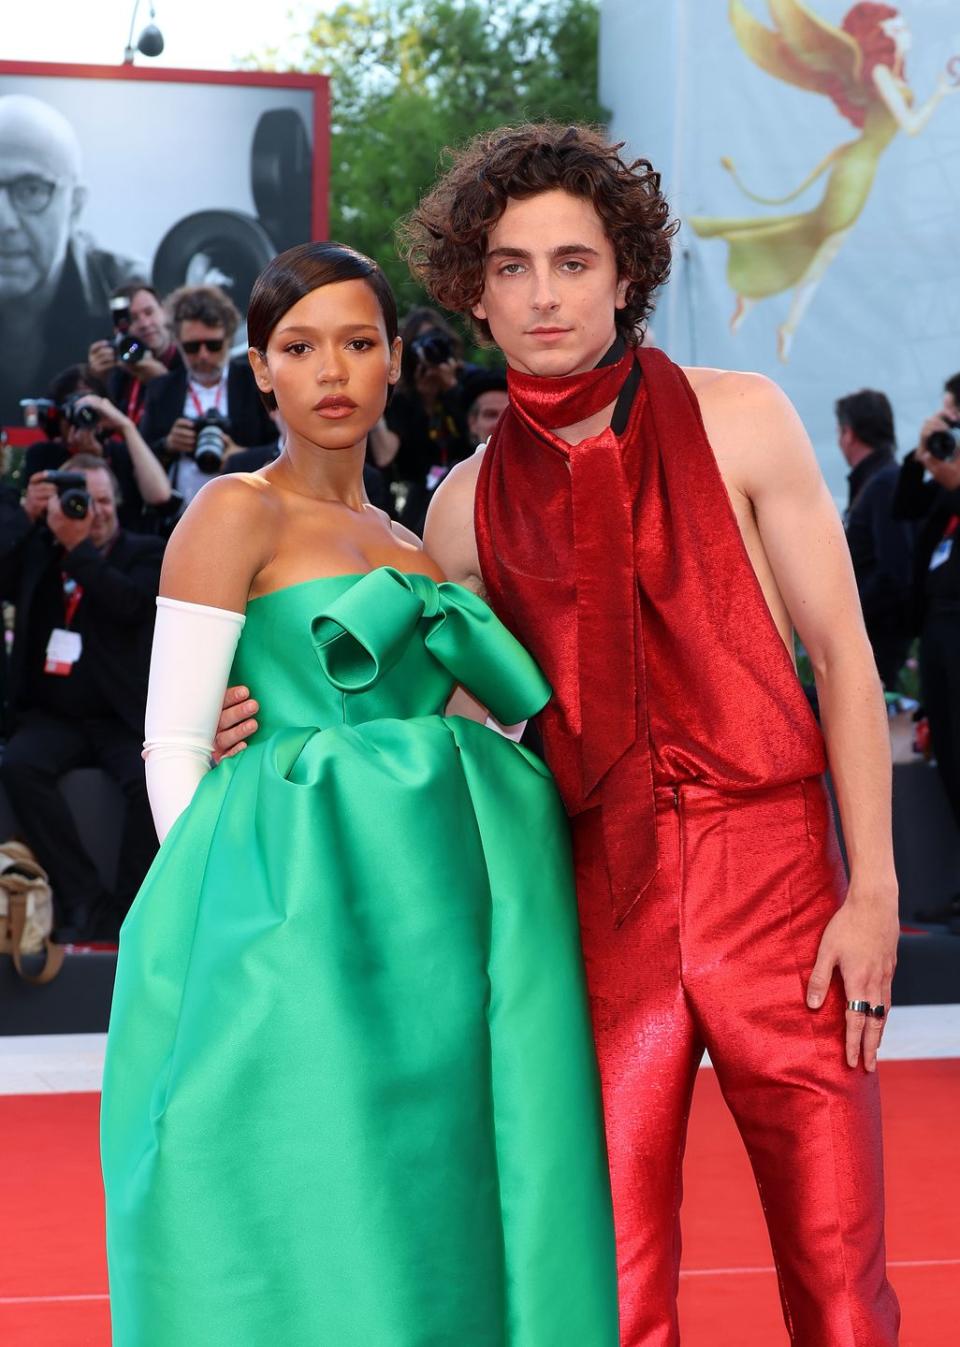 The Timothée Chalamet and Kylie Jenner dating rumours are getting real